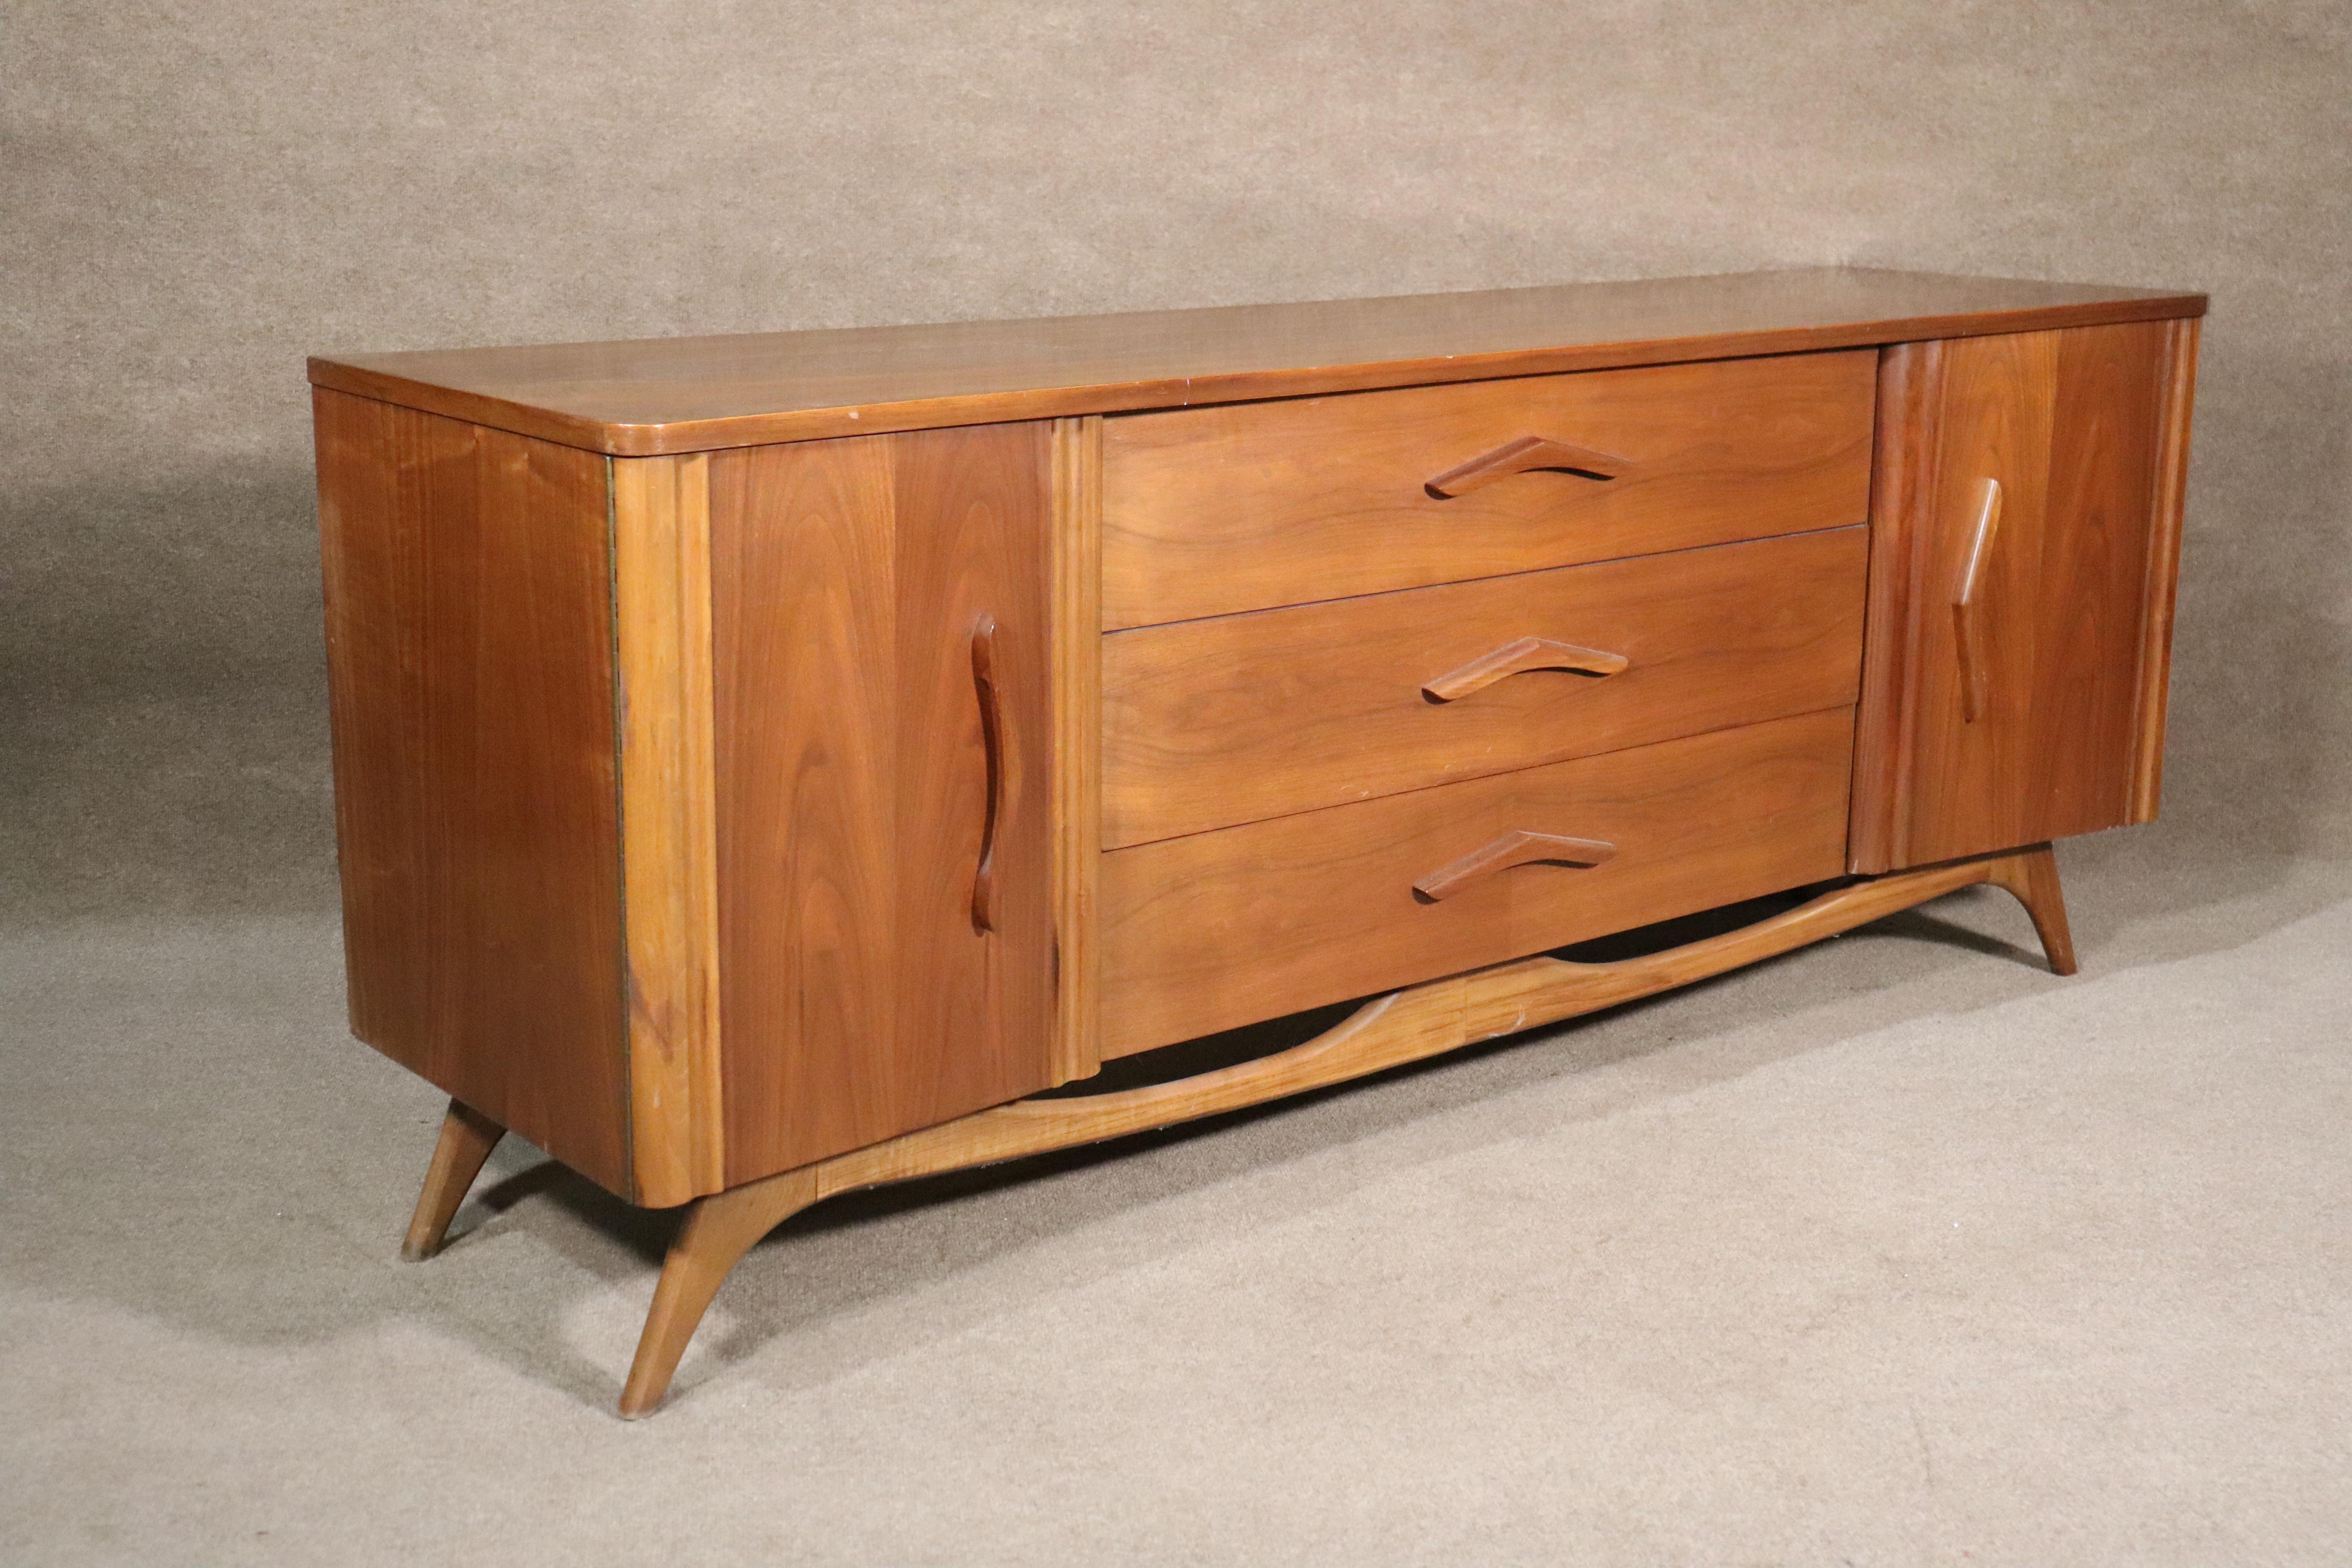 Long American walnut dresser with nine drawers. Features organic boomerang handles and matching sculpted base.
Please confirm location.